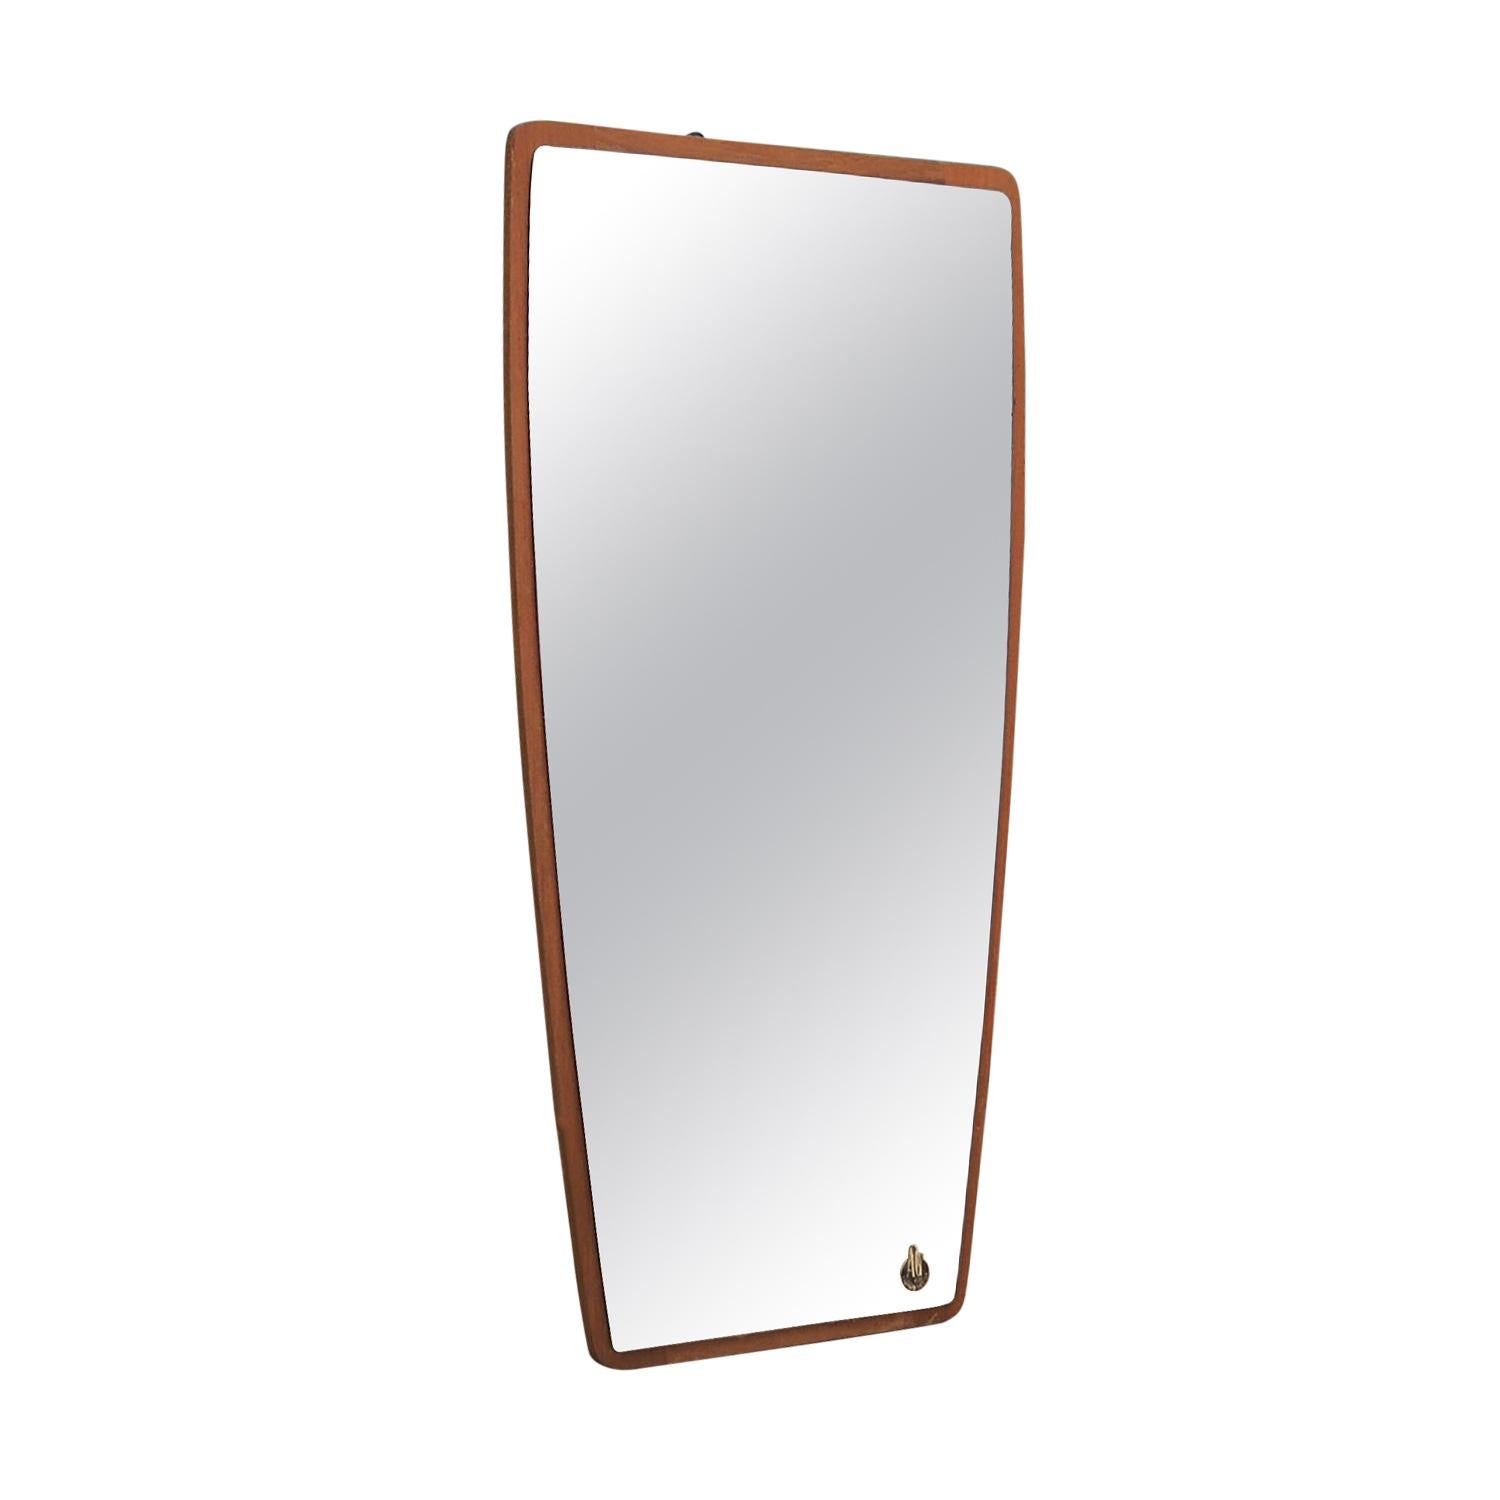 Excellent mirror from the 1960s-1970s, Scandinavian design, Minimalist form. Frame of the furniture is covered with teak veneer, and surface of the mirror without any scratches. Preserved in good condition, directly for use.

Dimensions: Height 70